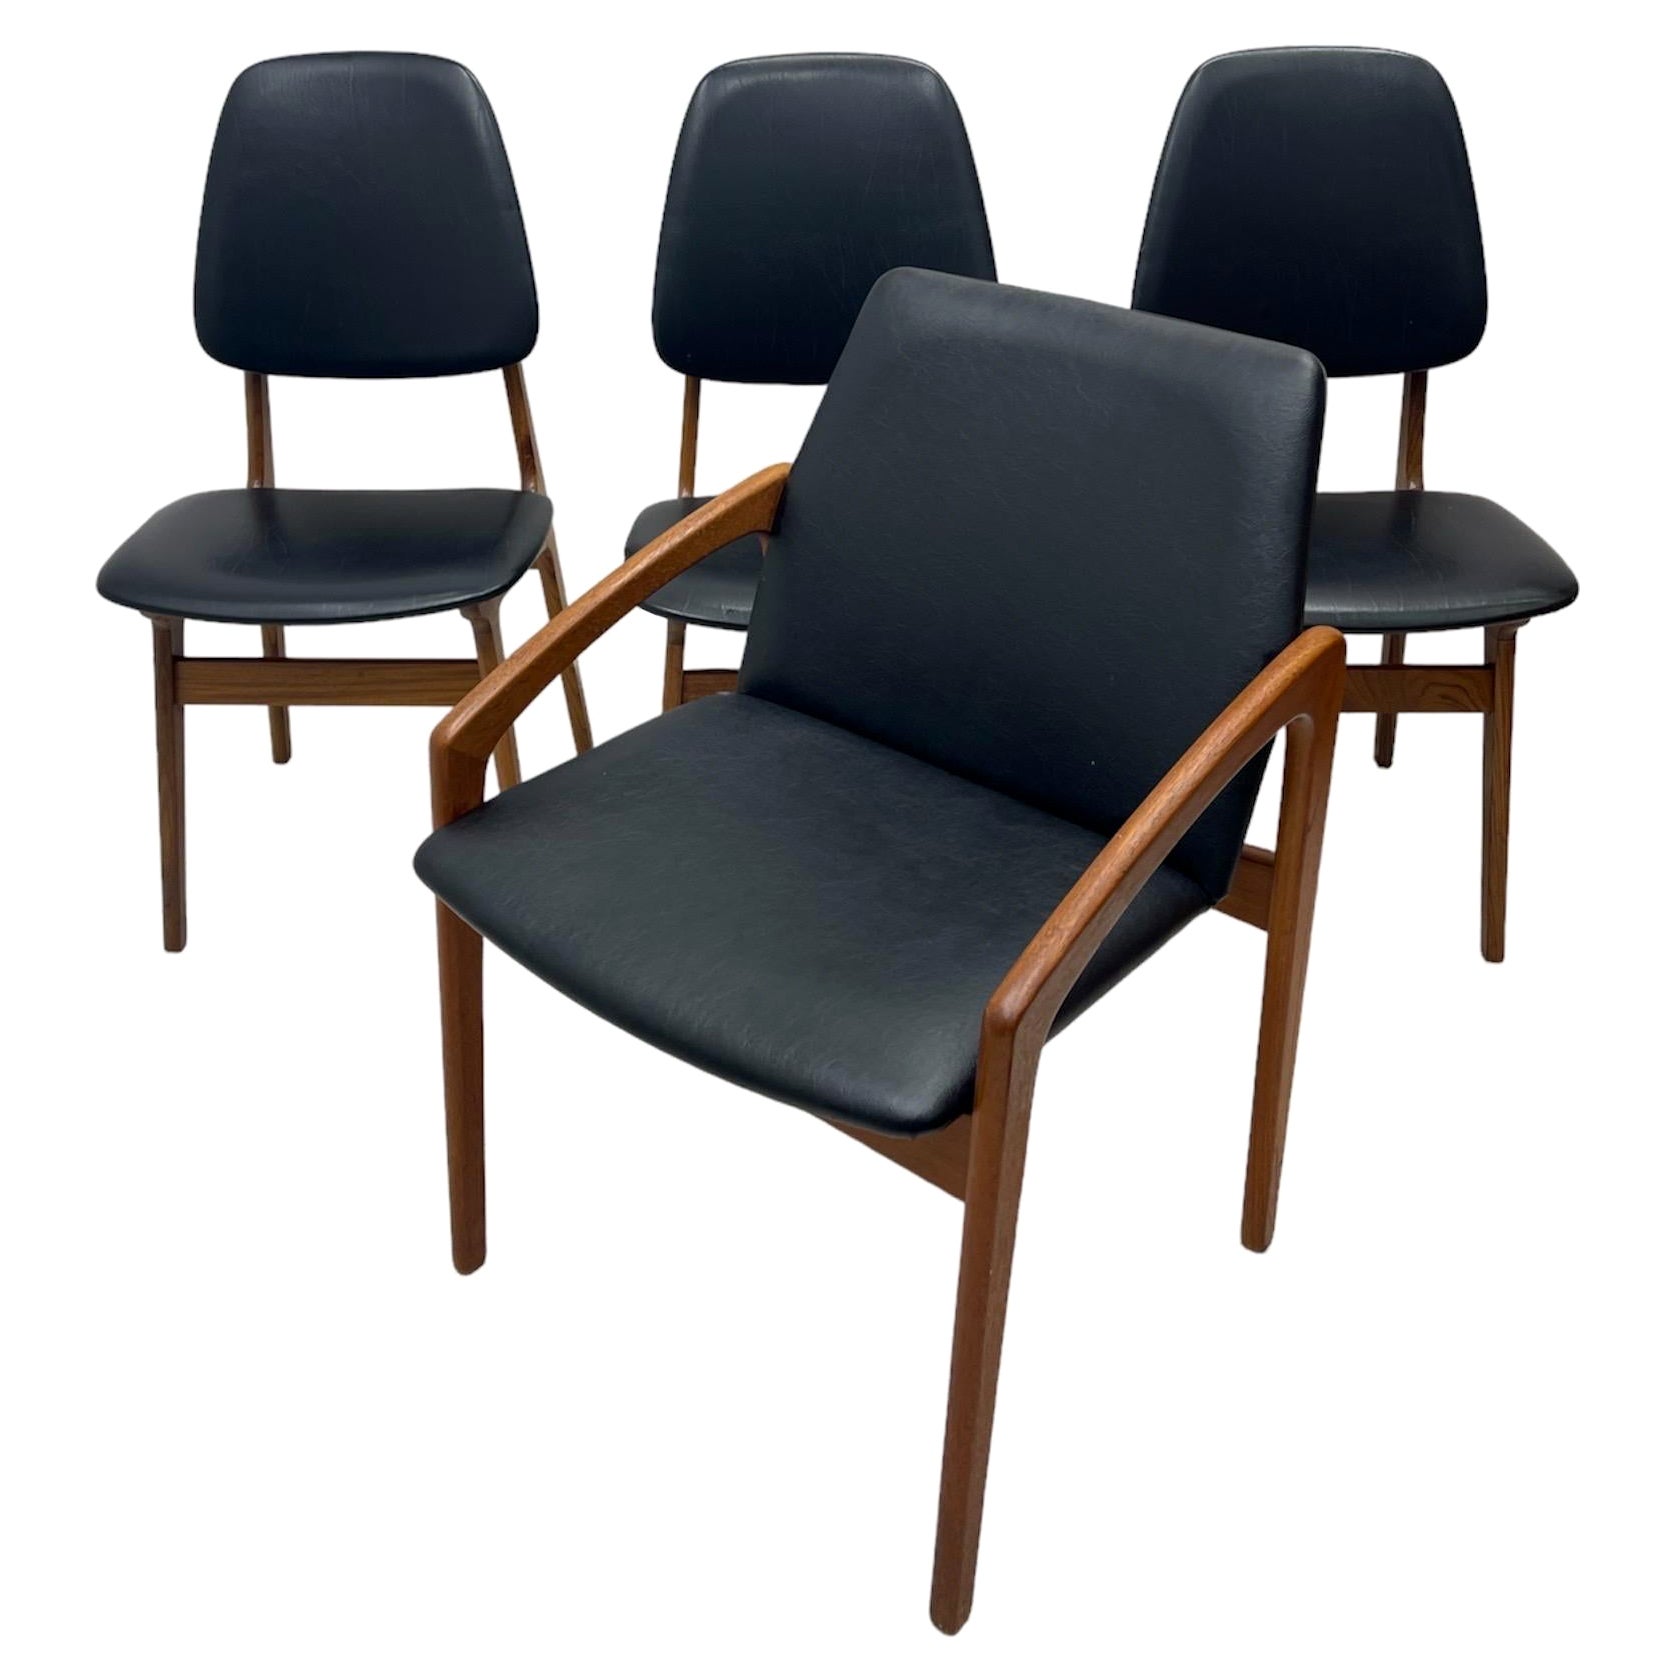 Vintage Danish Modern Chairs Set of 4 For Sale